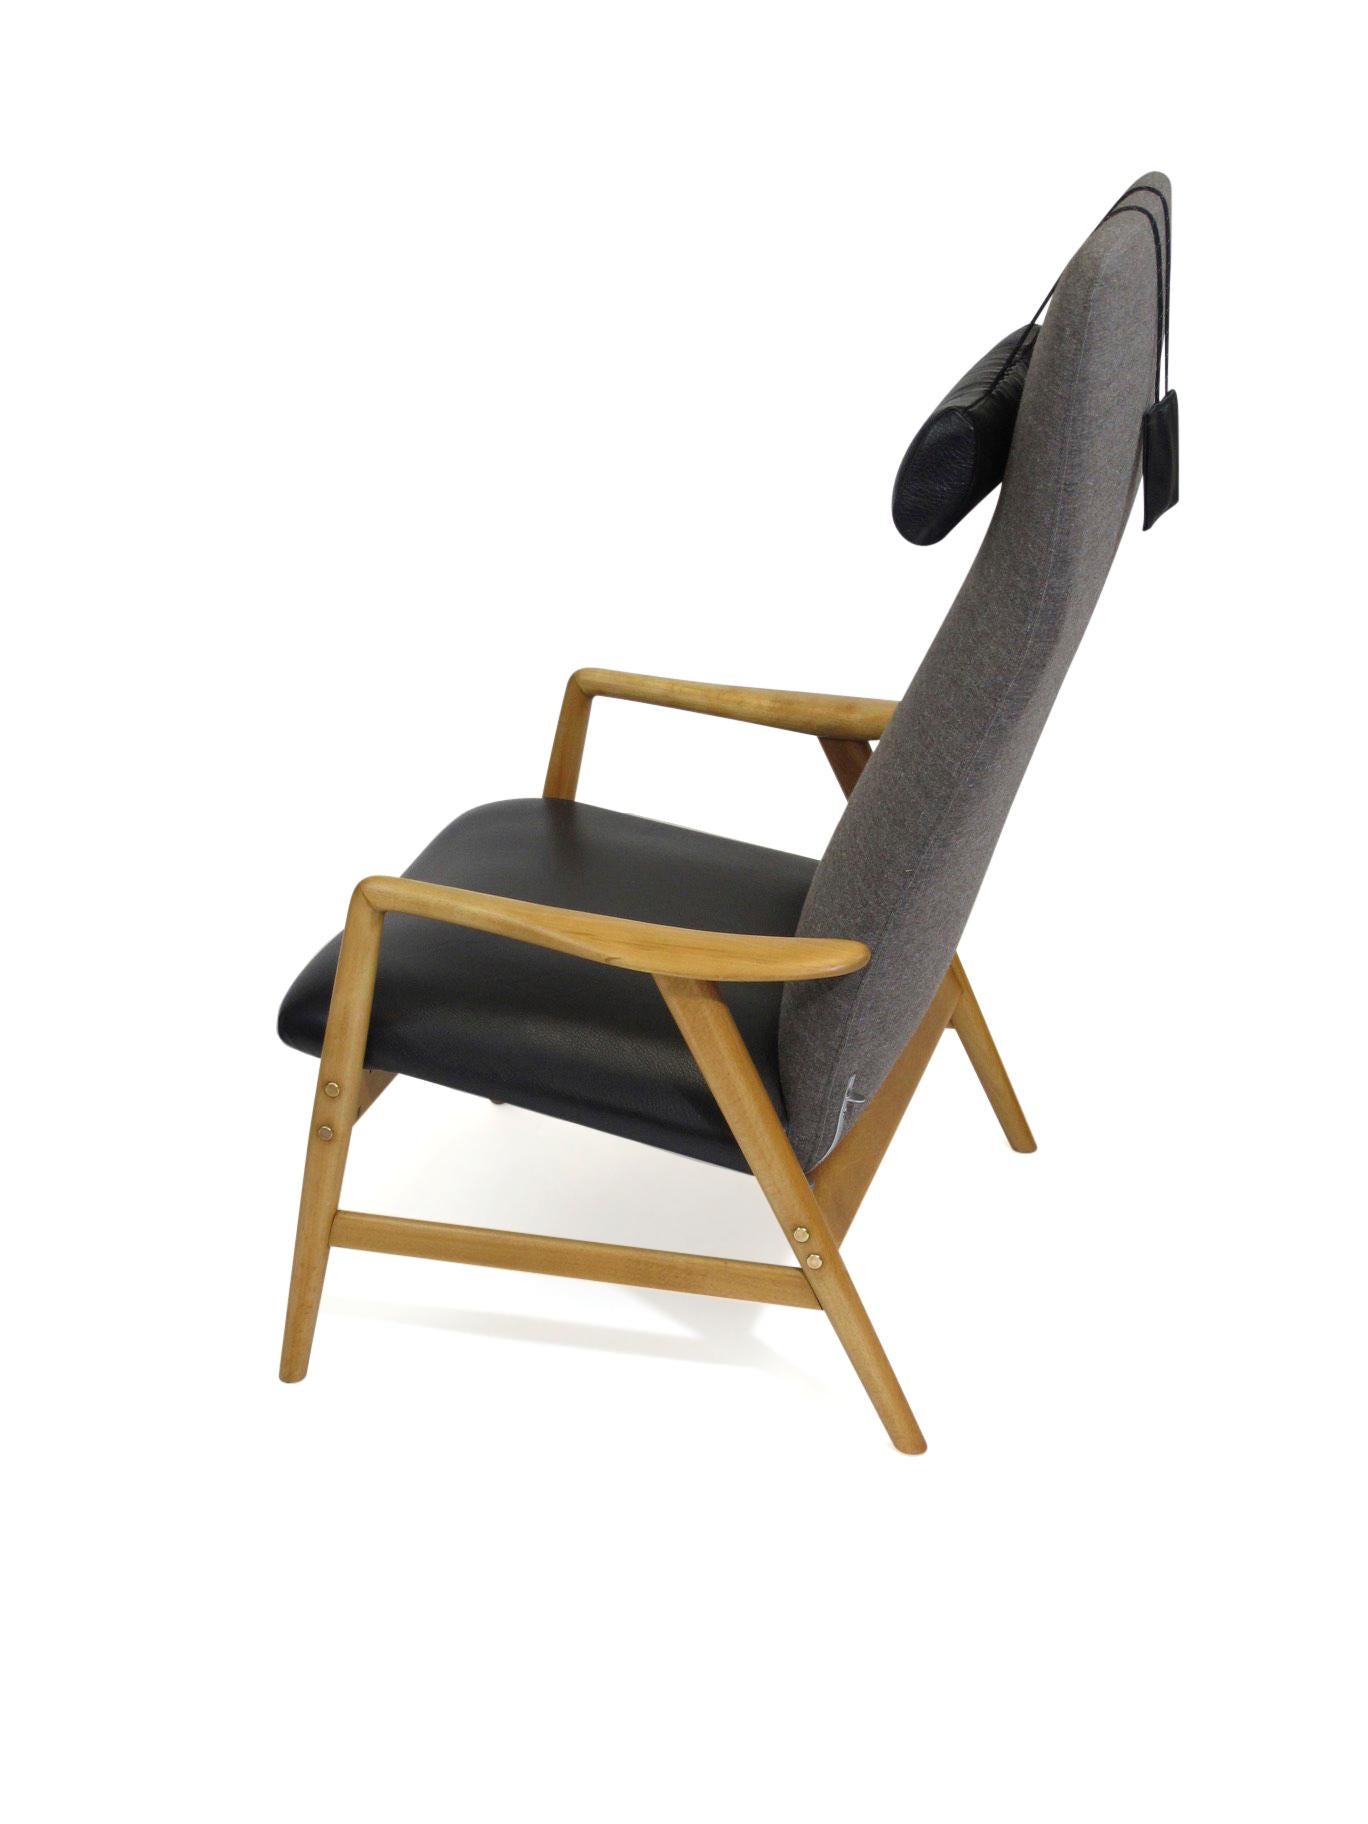 Alf Svensson for Dux Beech Lounge Chair with Black Leather Seat 2